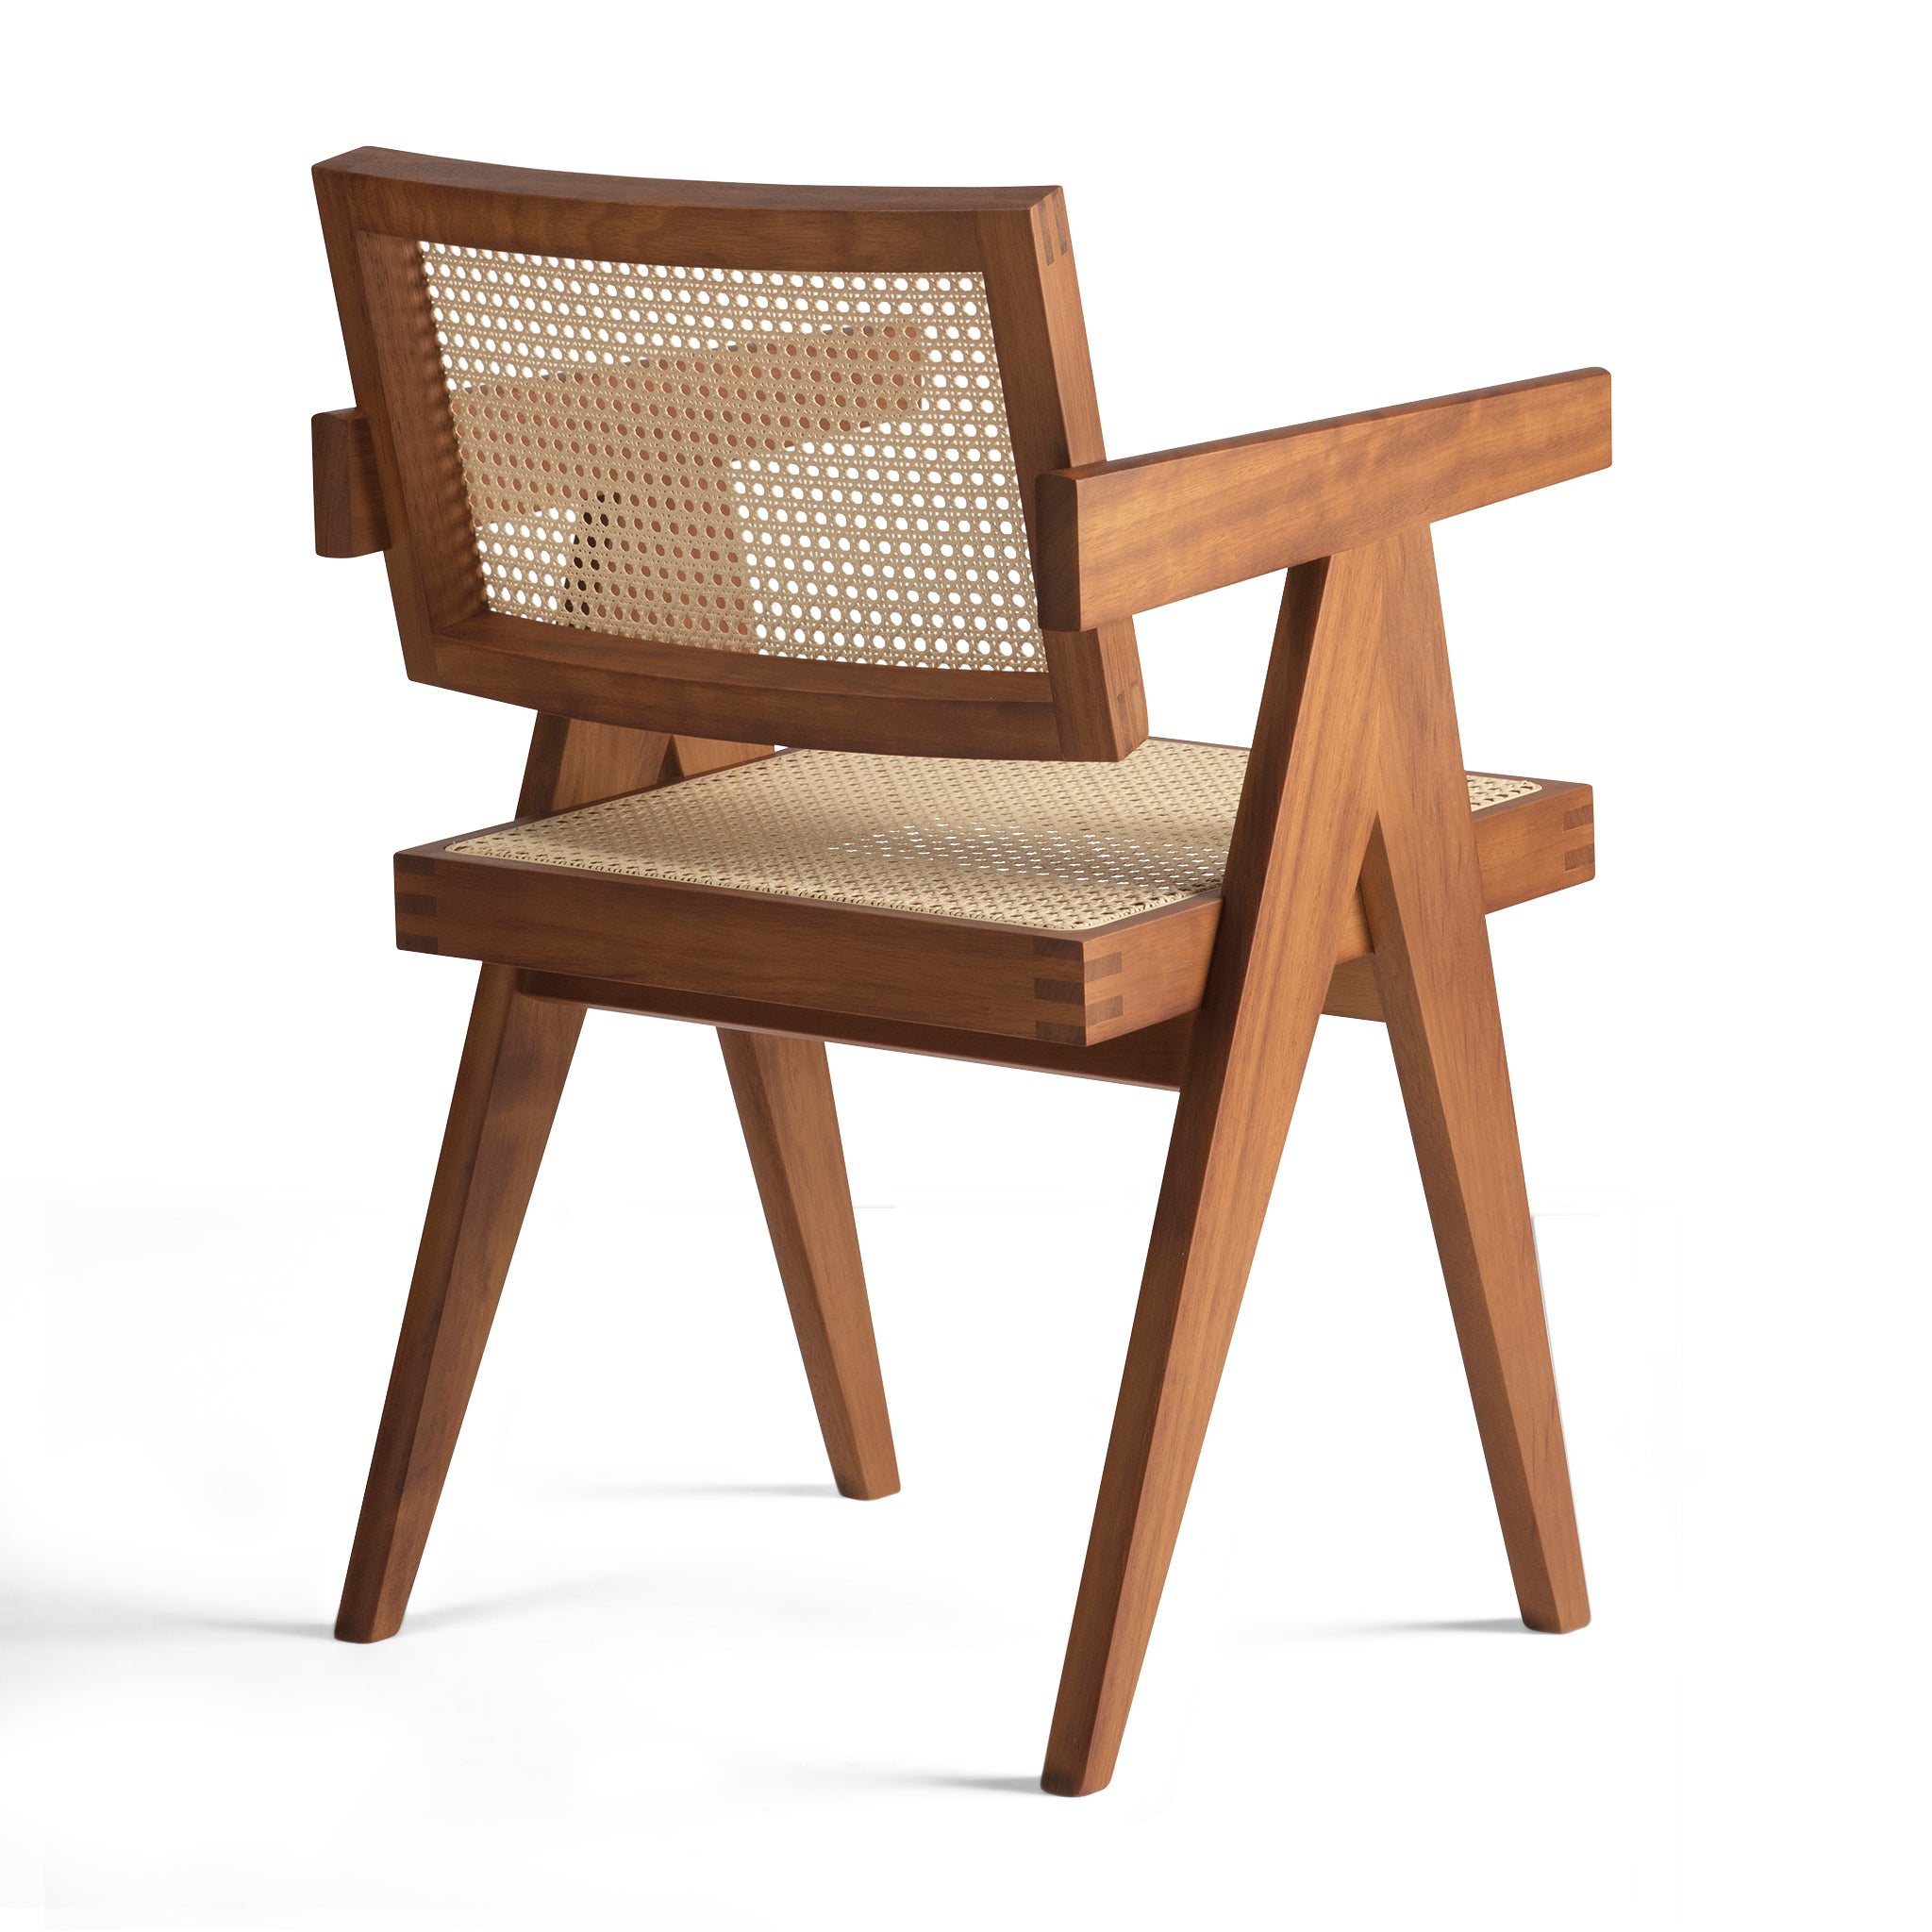 Back view of an authentic chandigarh armchair, pierre jeanneret era, teak frame, viennese cane, produced by Klarel #K34-1